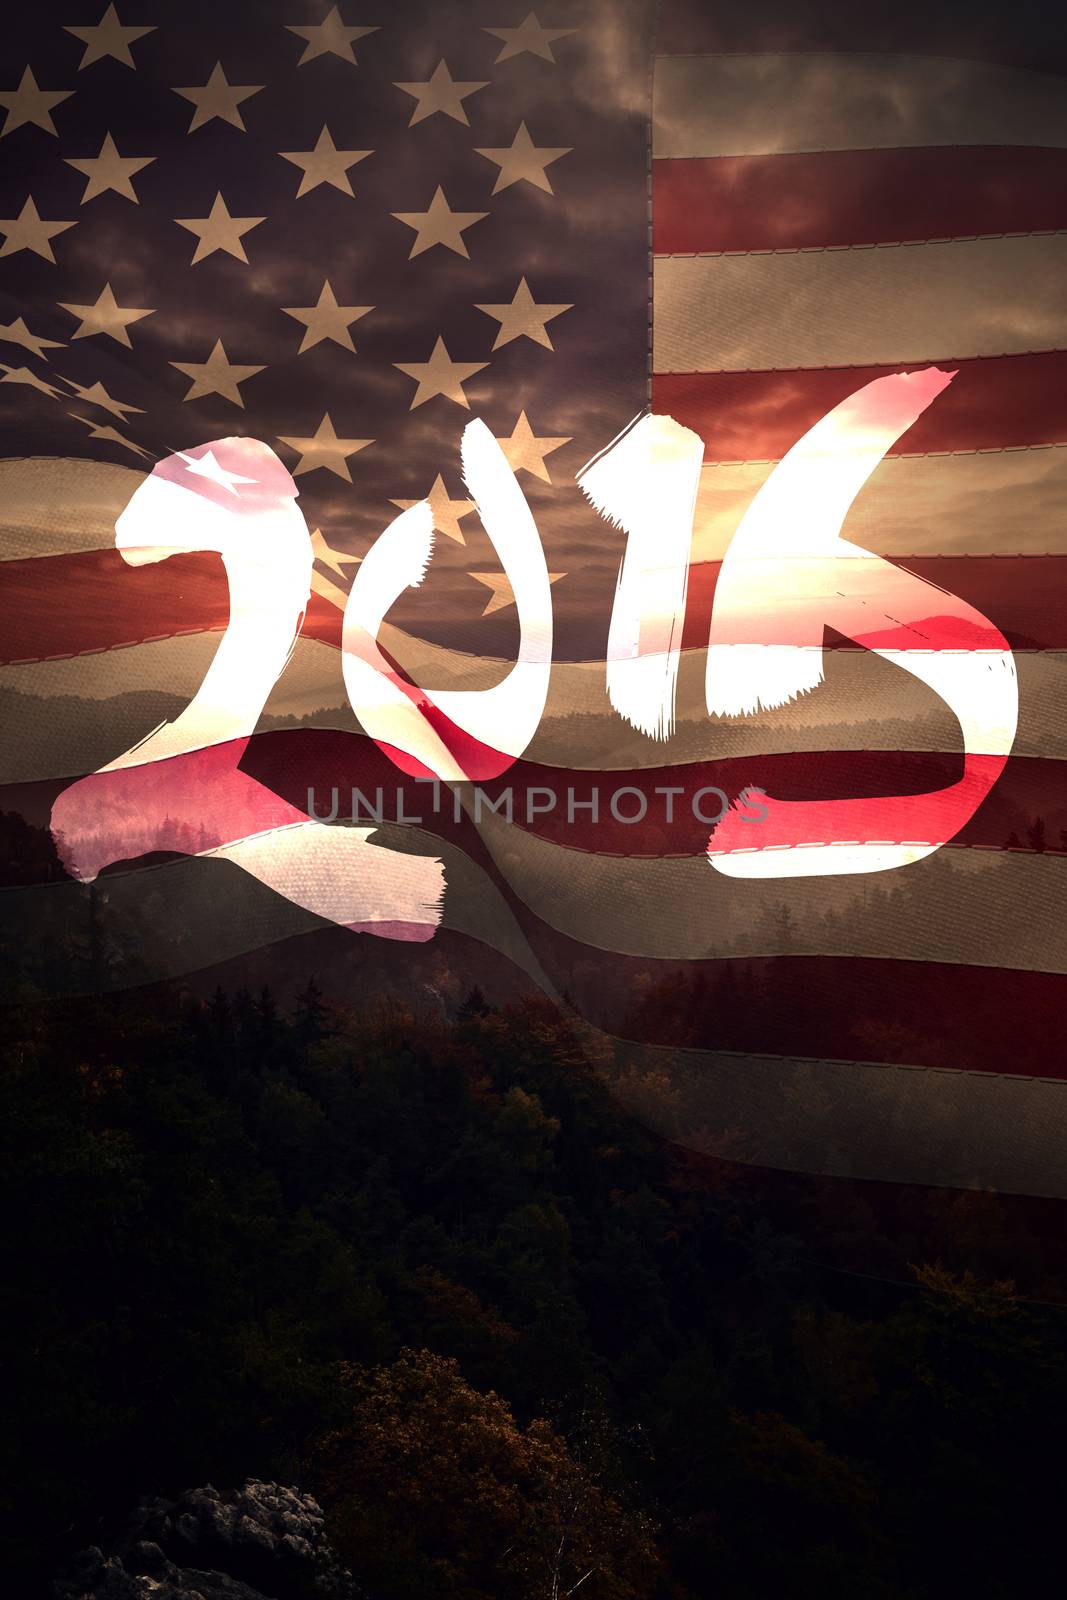 2015 in brush stroke against composite image of digitally generated united states national flag